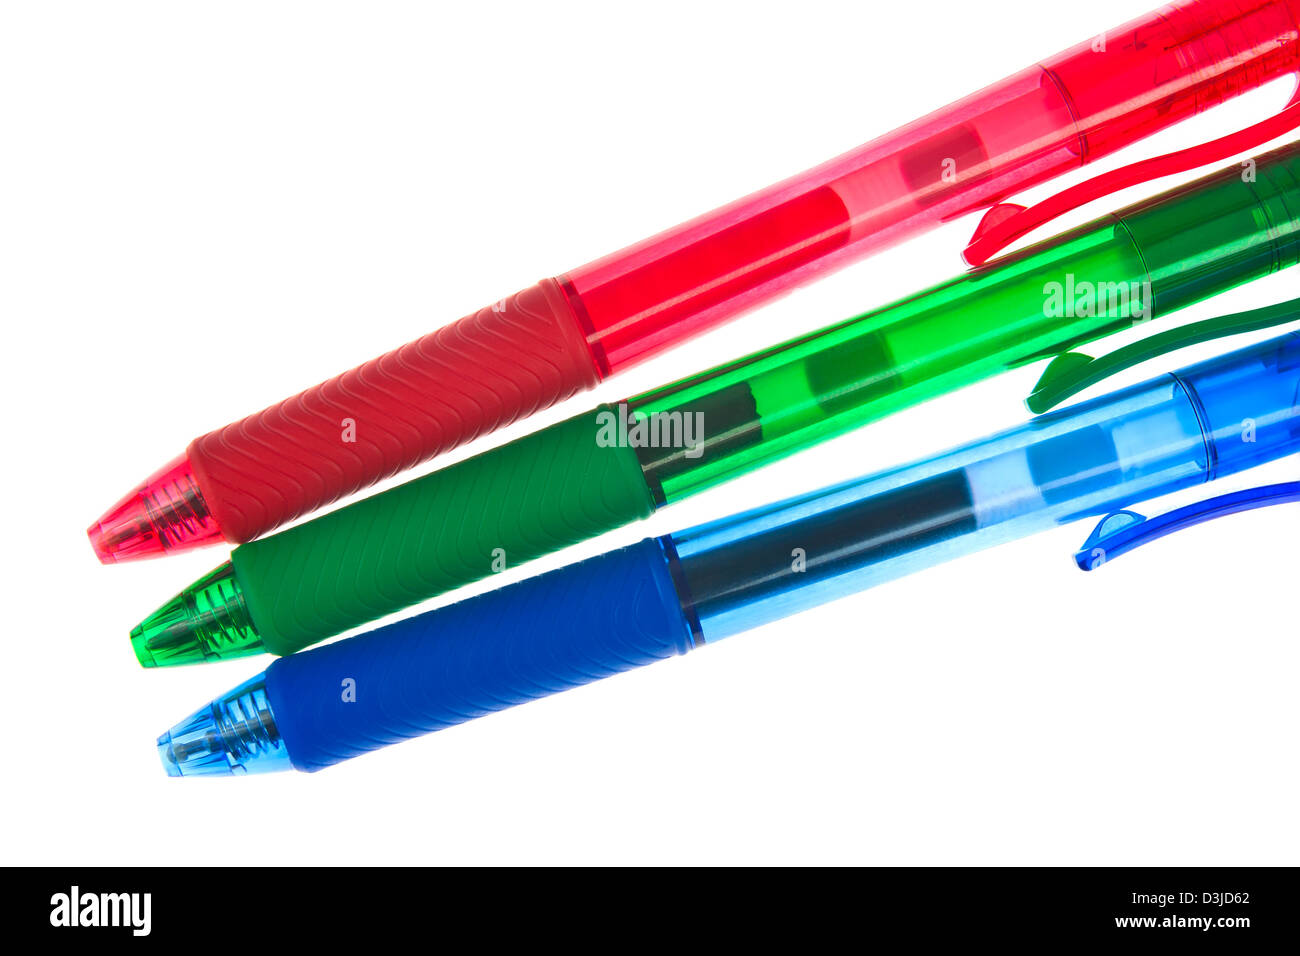 Red, green and blue ballpoint pens on white background Stock Photo